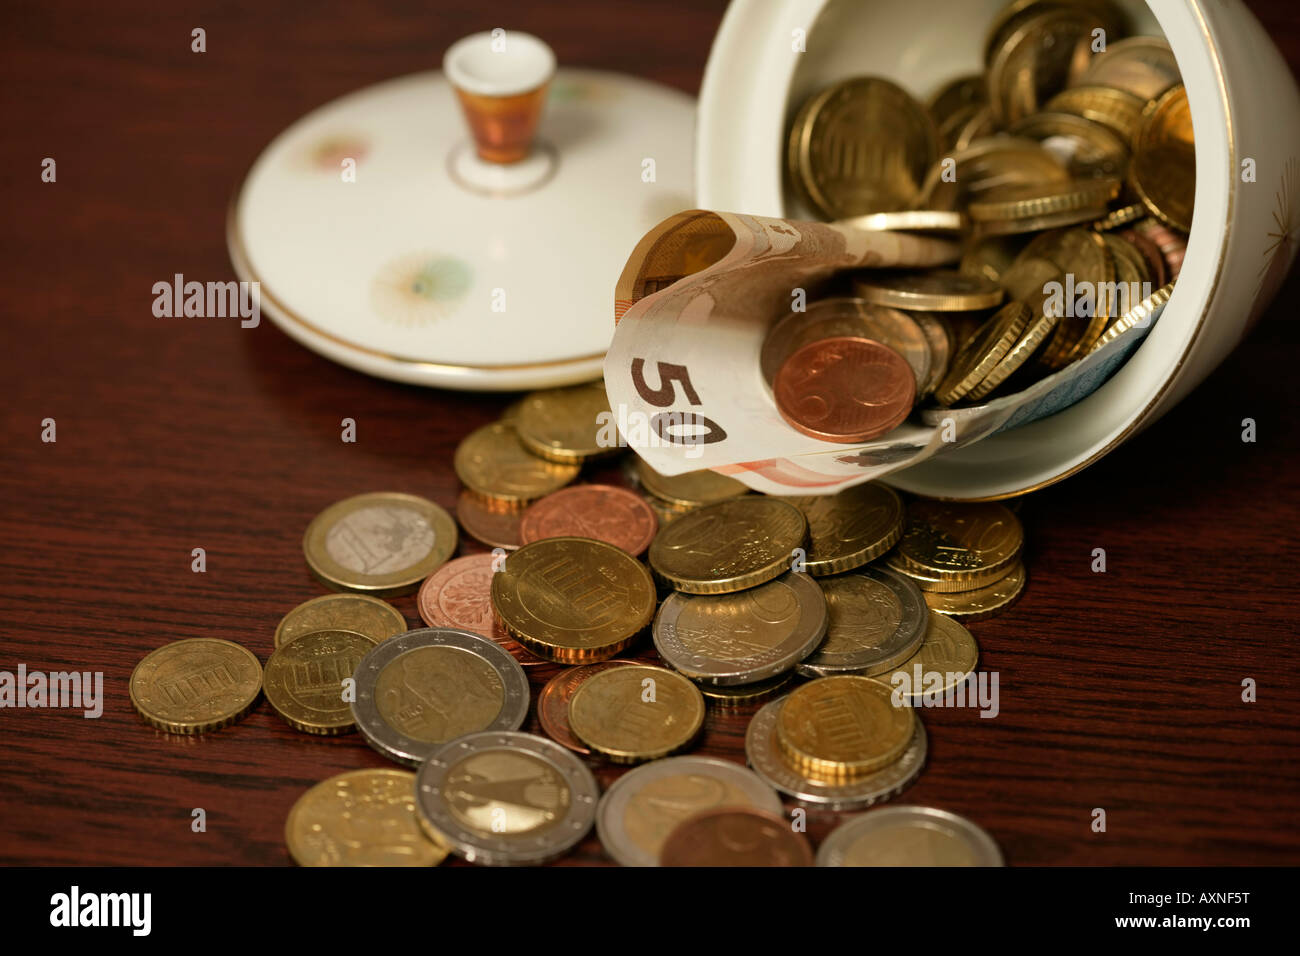 Hand with coins in front of a sugar bowl filled with Euro bills (part of), close-up Stock Photo